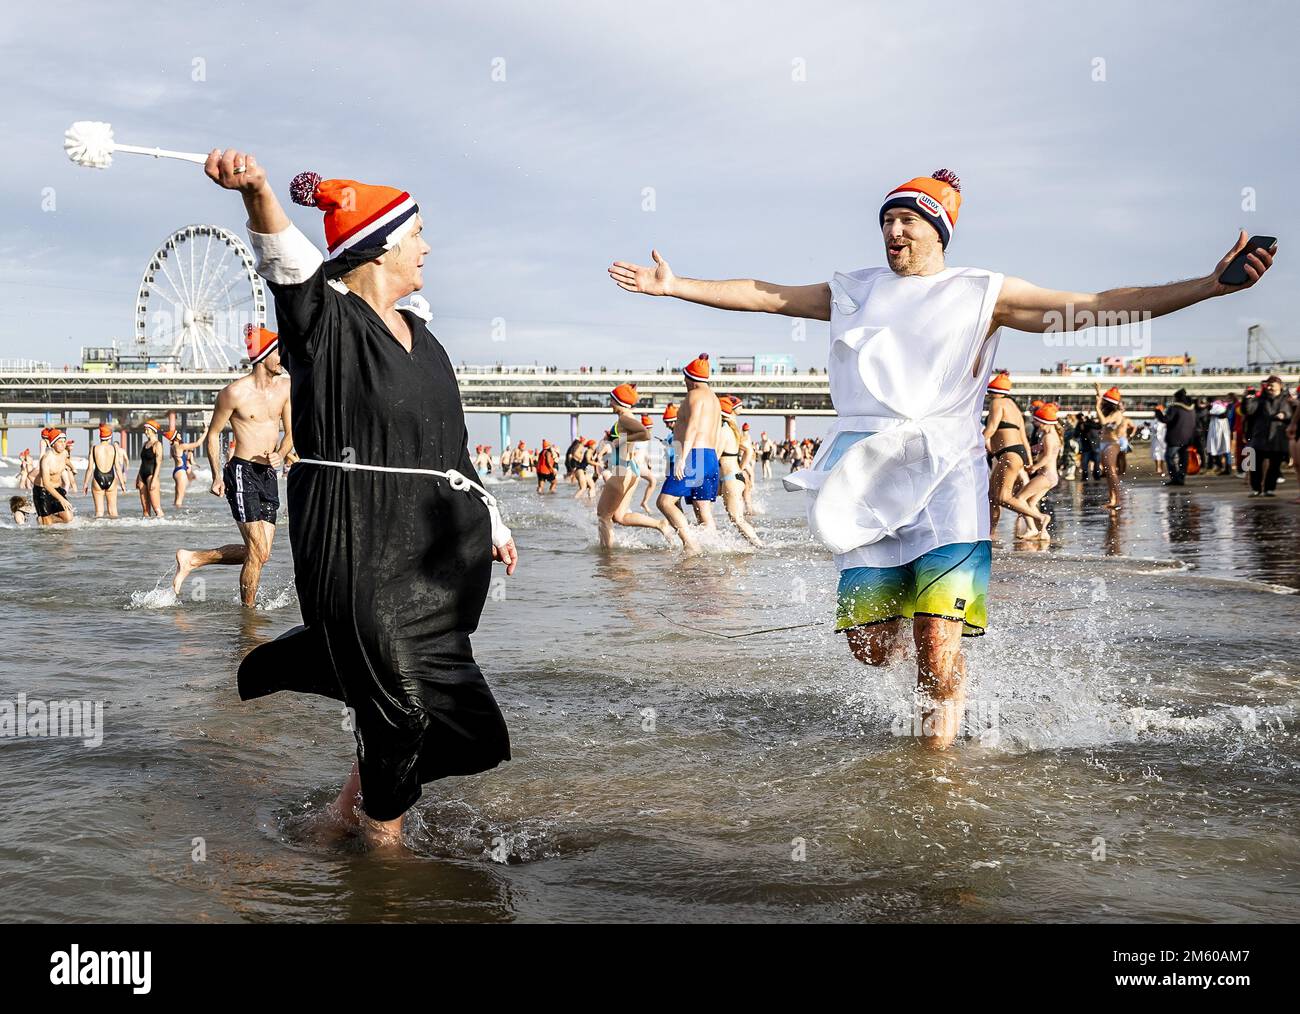 SCHEVENINGEN - People run into the sea at the beach of Scheveningen on New Year's Day. The traditional New Year's dive can continue again after two previous canceled editions due to the corona crisis. ANP REMKO DE WAAL netherlands out - belgium out Stock Photo